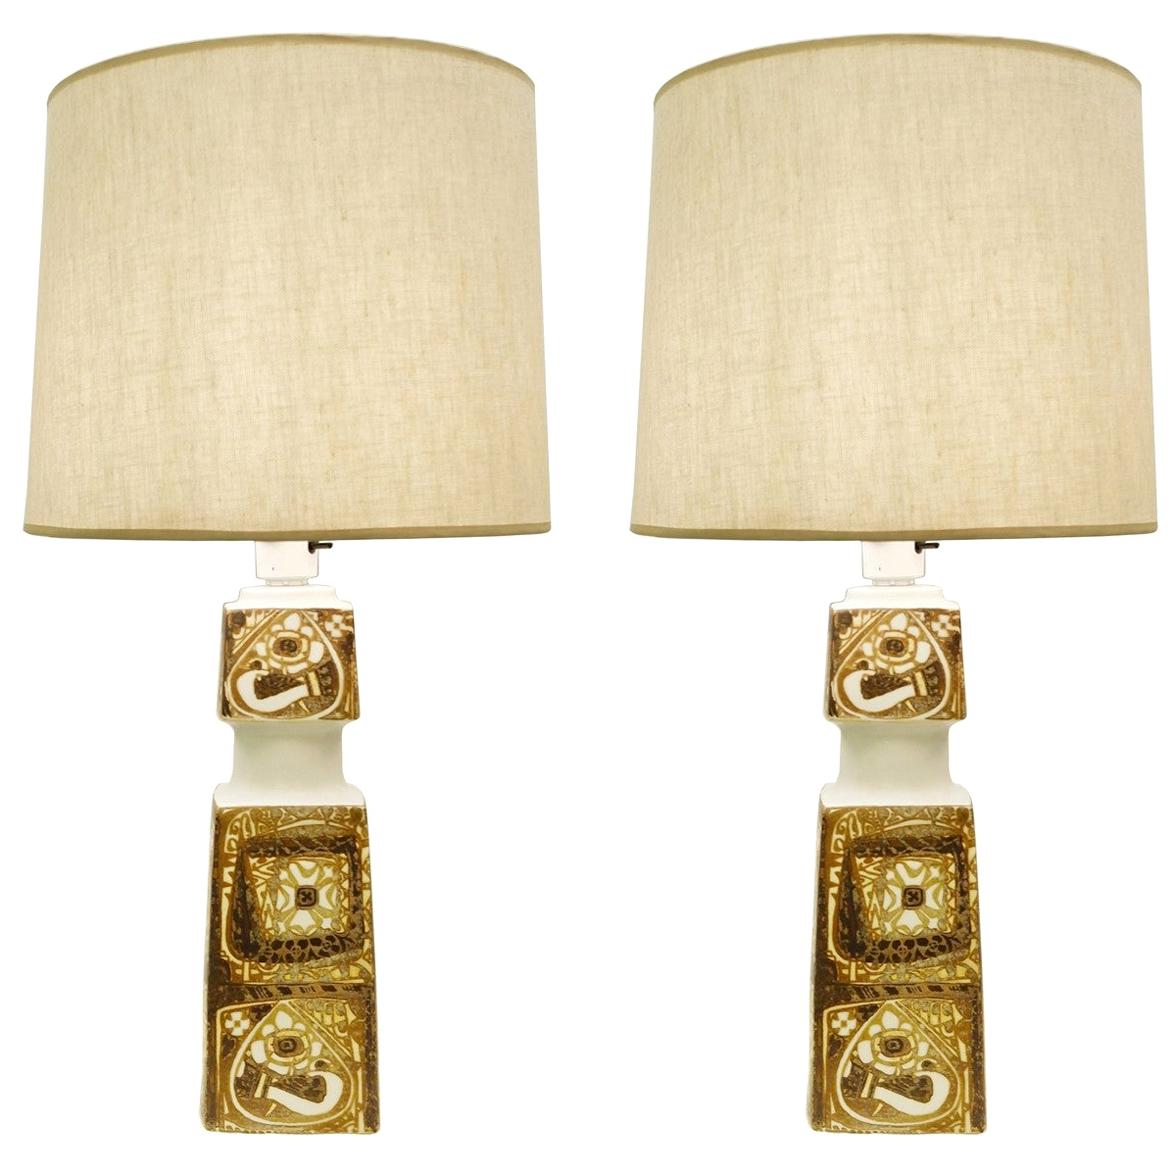 Pair of Danish Porcelain Baca Table Lamps by Nils Thorsson for Royal Copenhagen